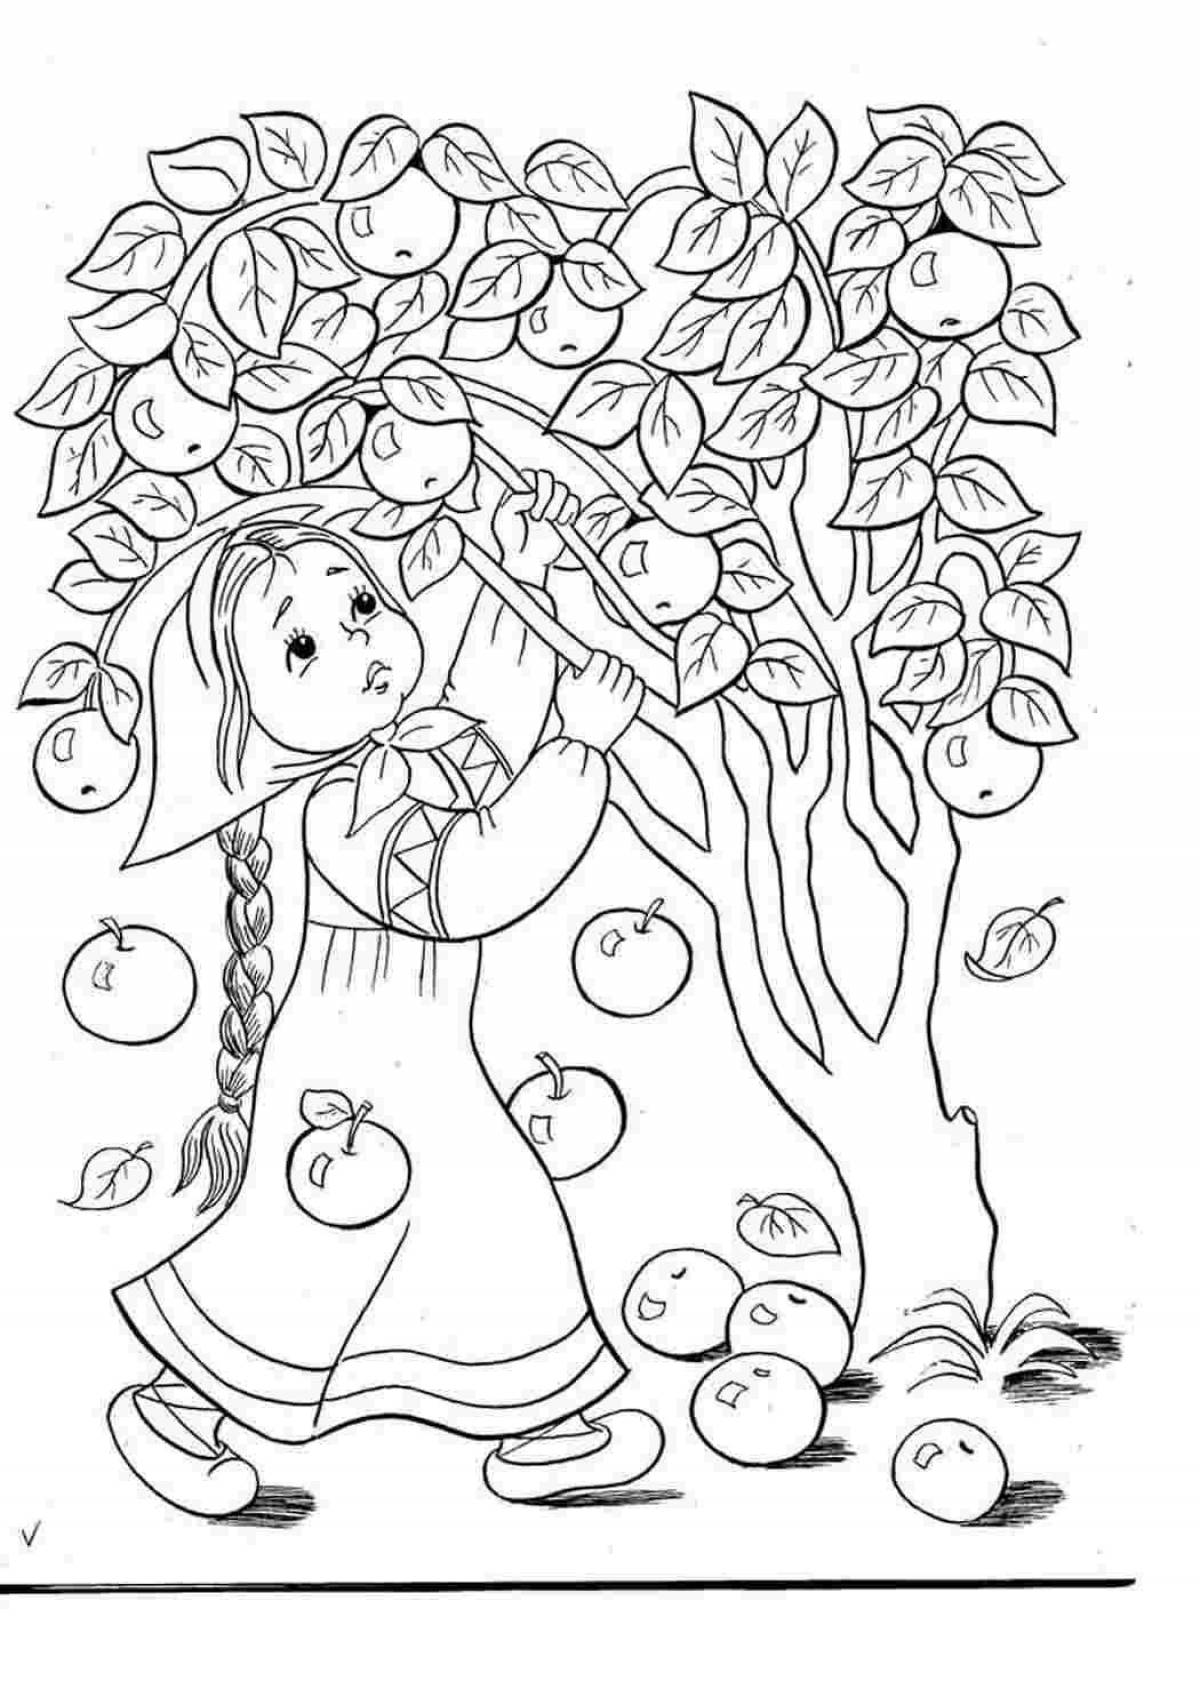 Amazing story coloring book for girls